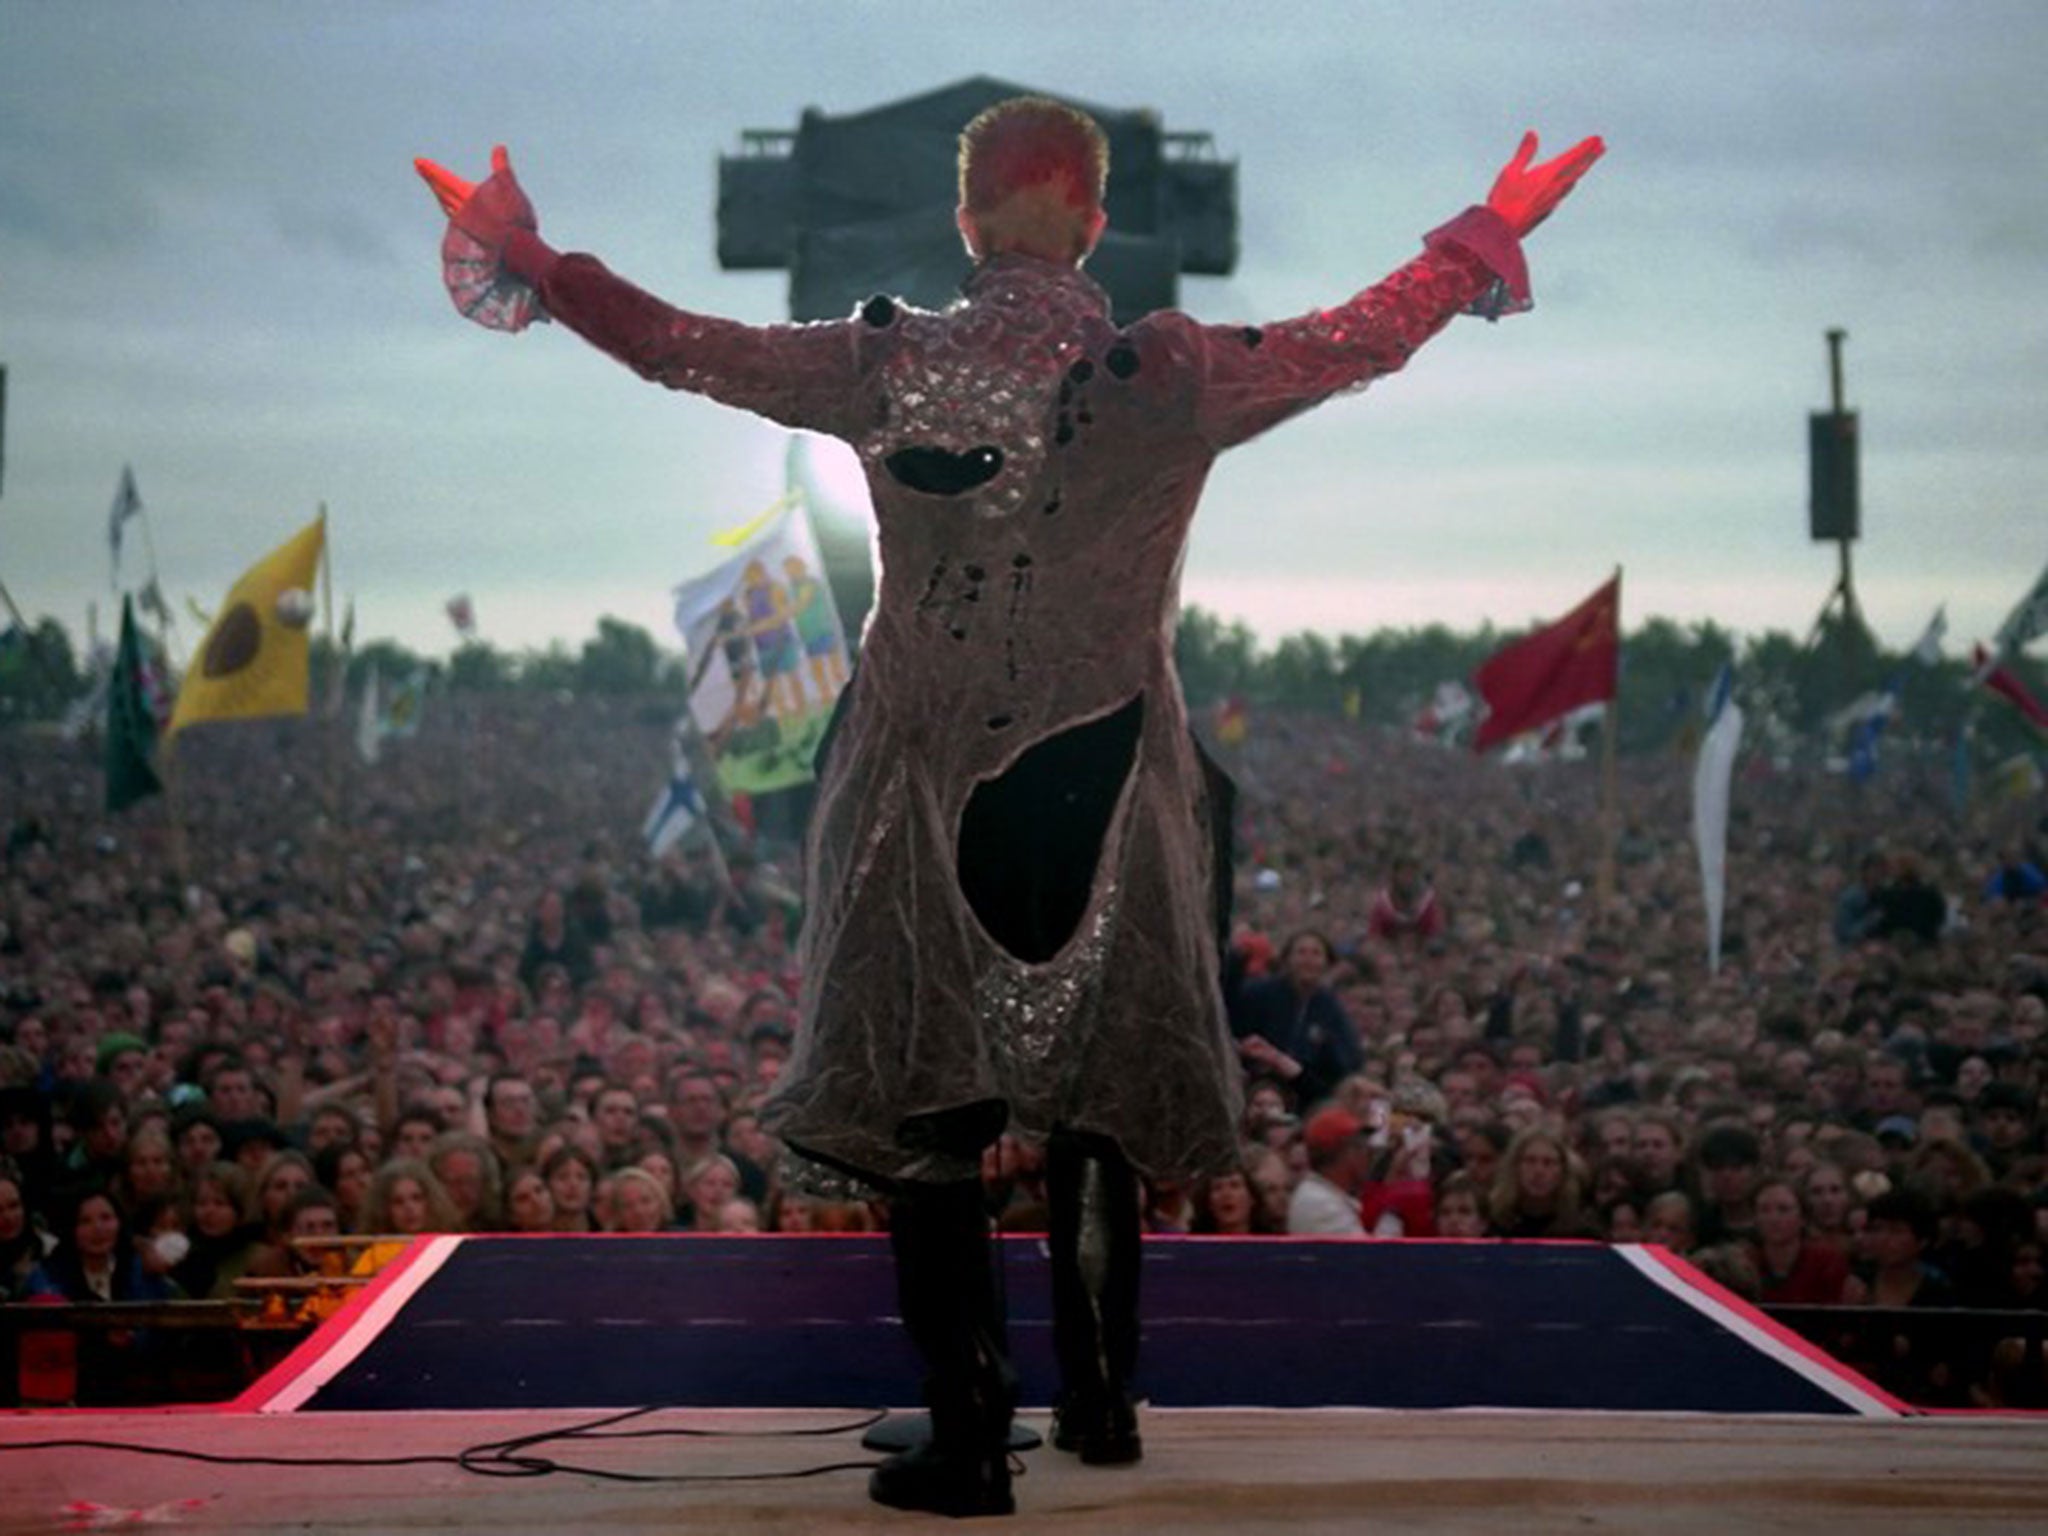 David Bowie on stage at Roskilde Festival in Denmark in 1996